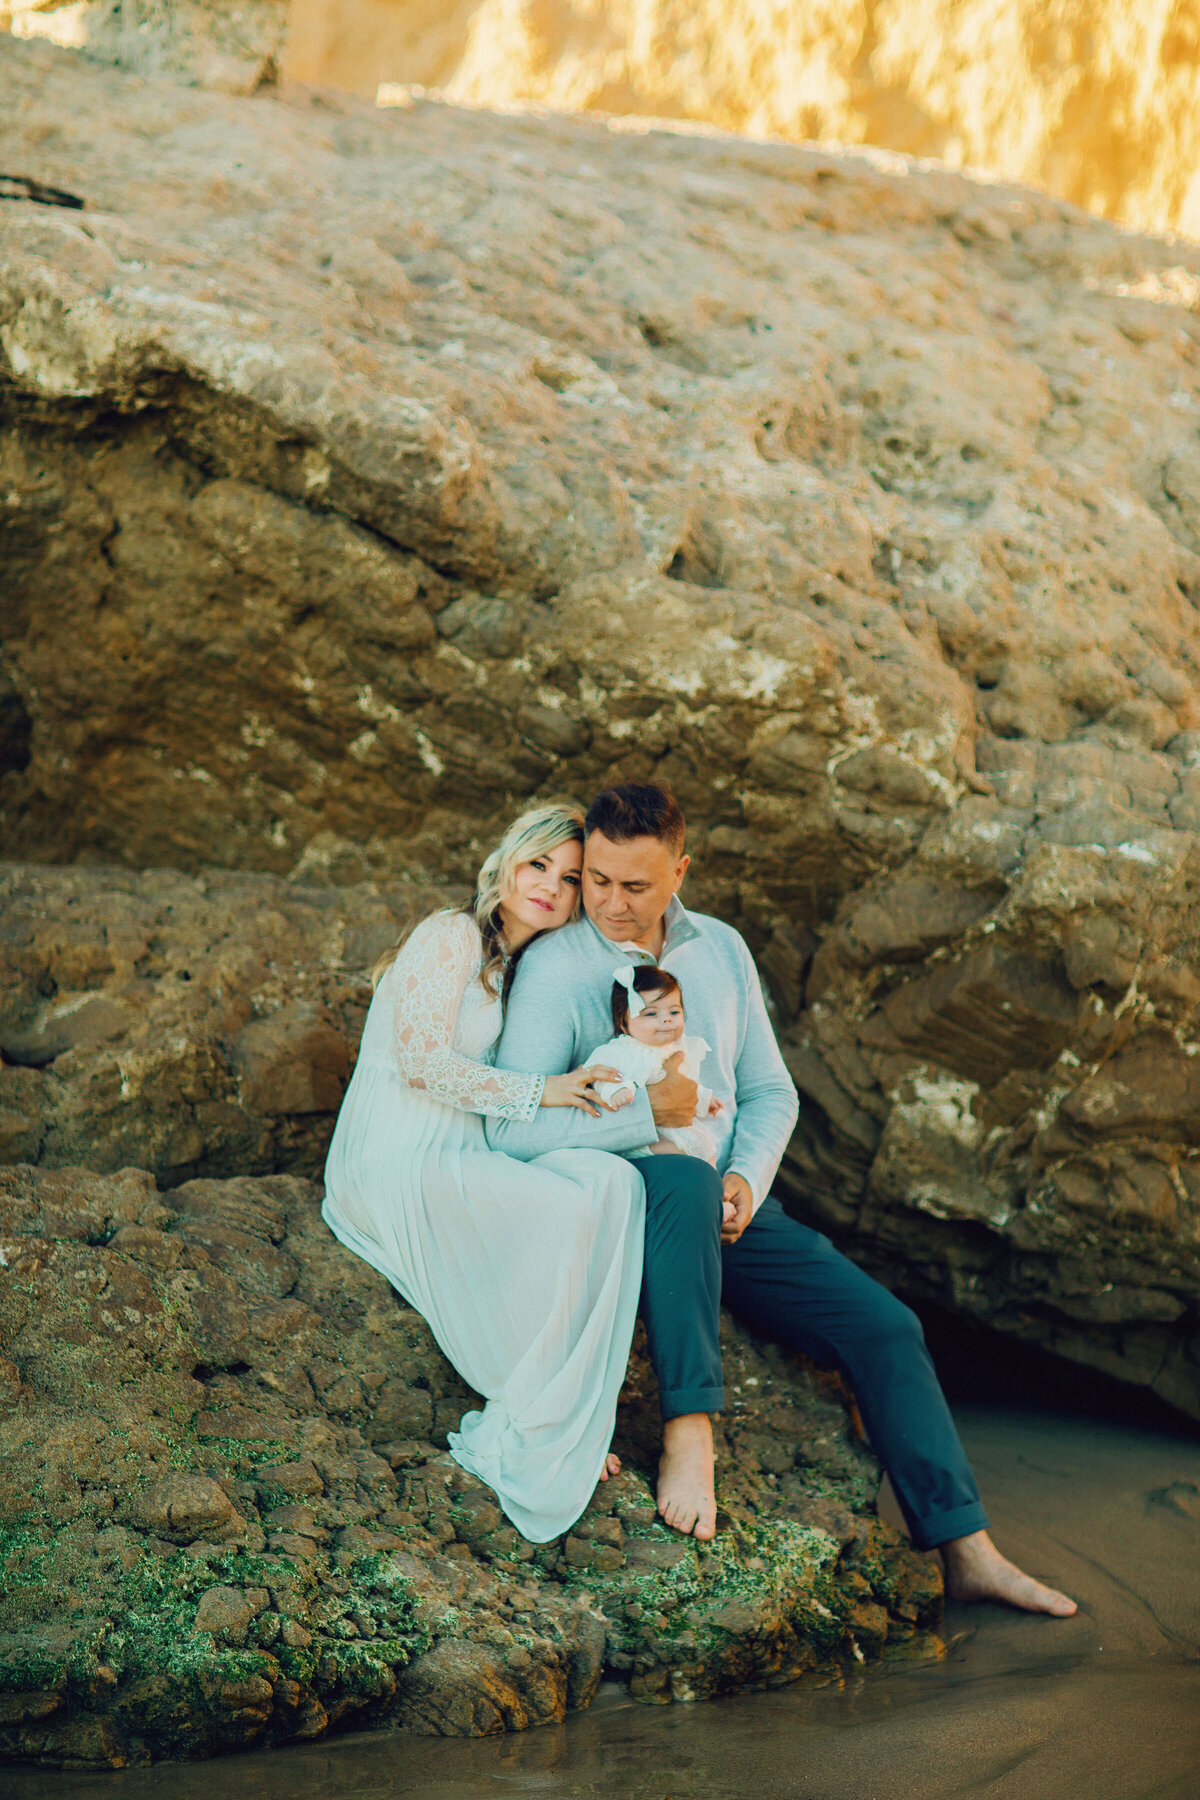 Family Portrait Photo Of Couple  Holding Their Baby While Seated On a Rock Los Angeles